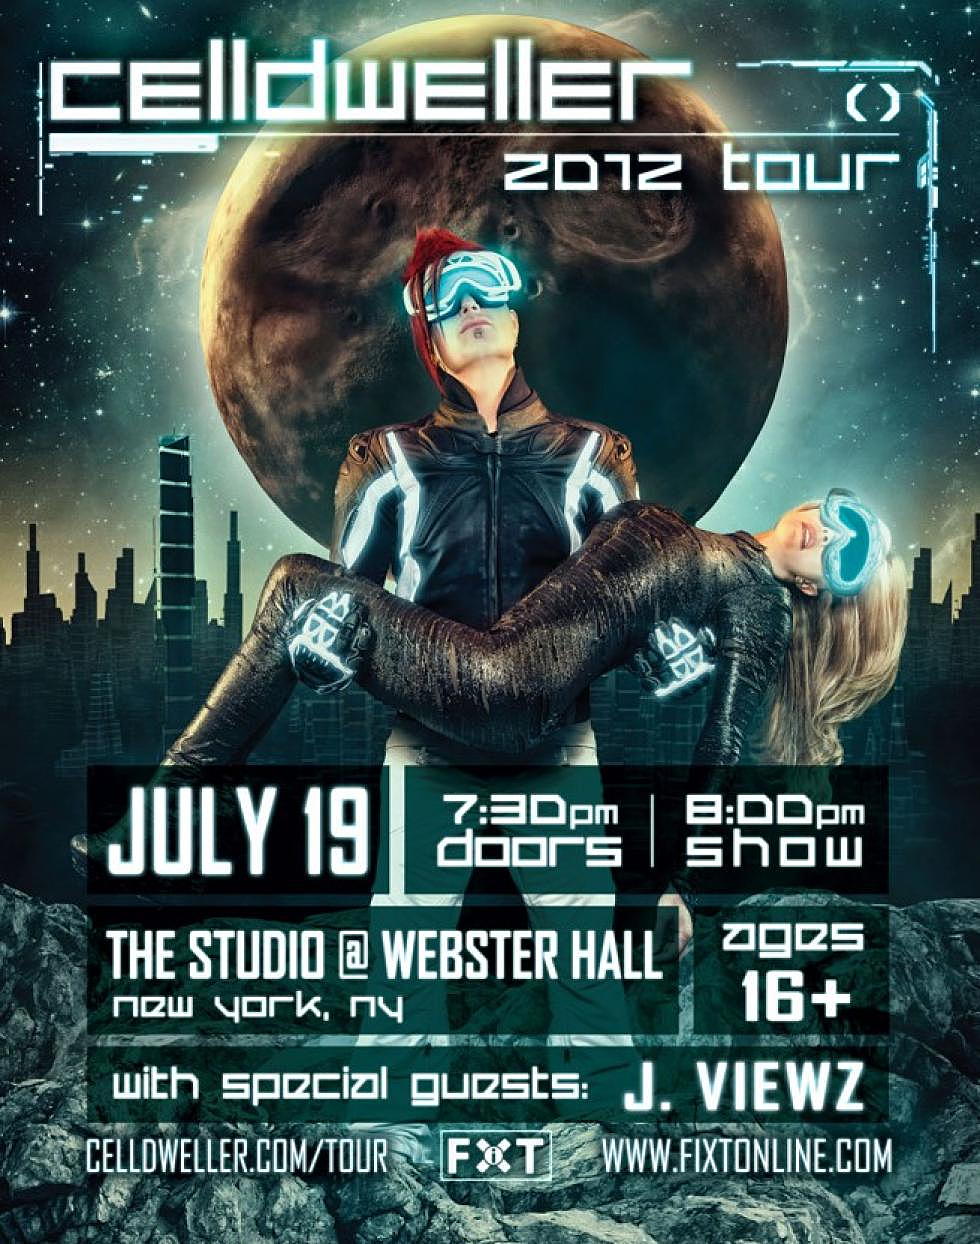 Celldweller at Webster Hall July 19th